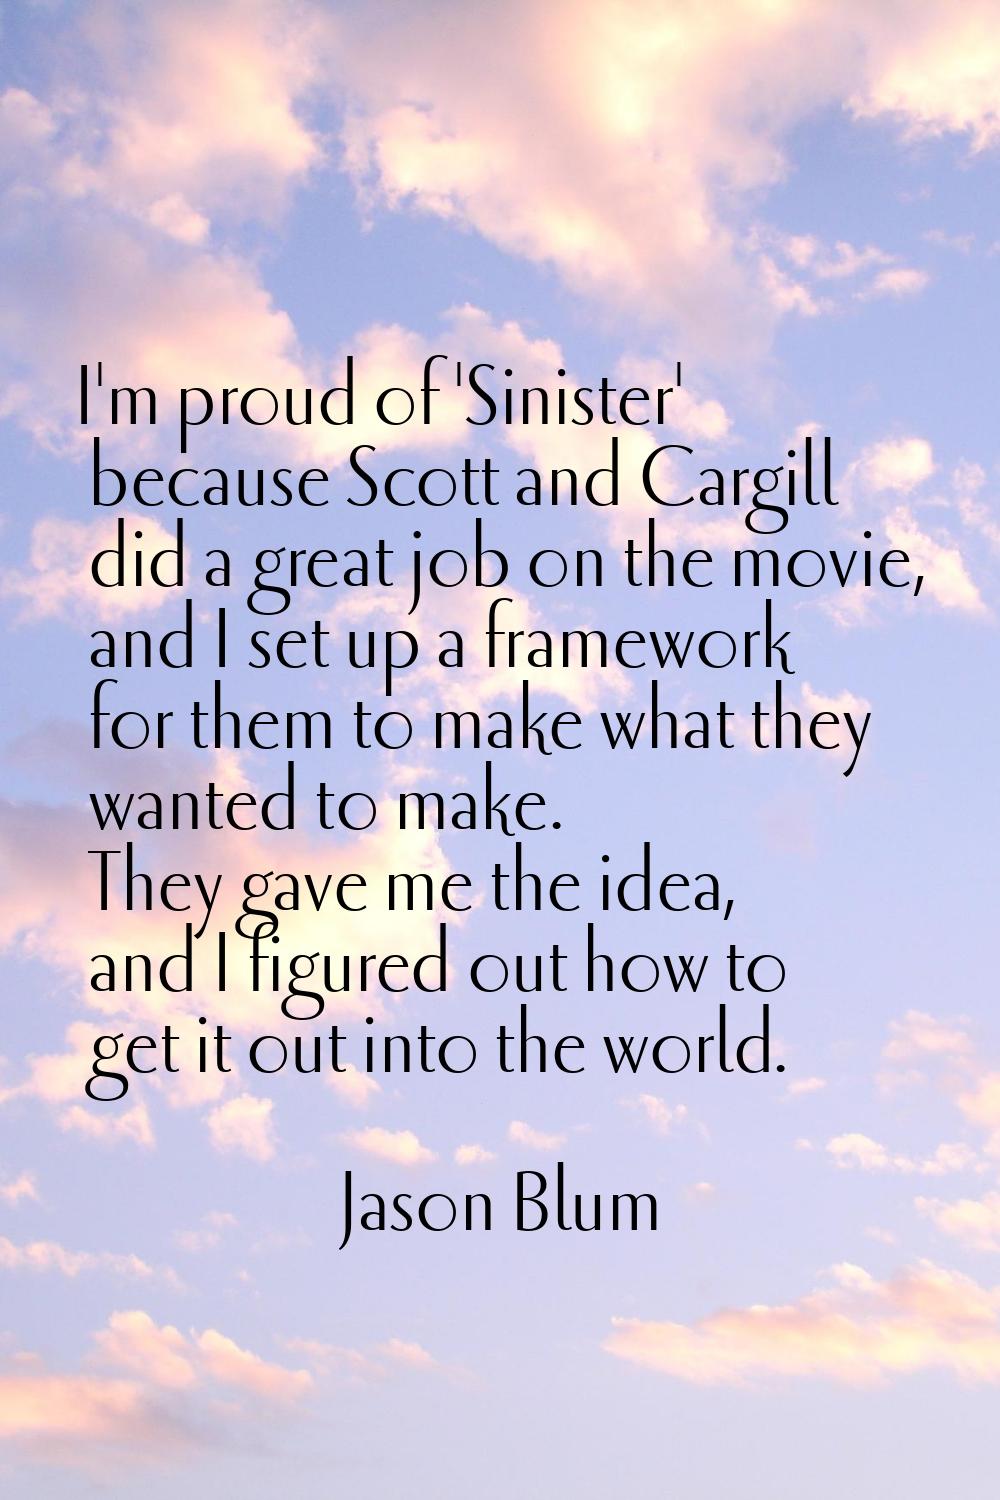 I'm proud of 'Sinister' because Scott and Cargill did a great job on the movie, and I set up a fram